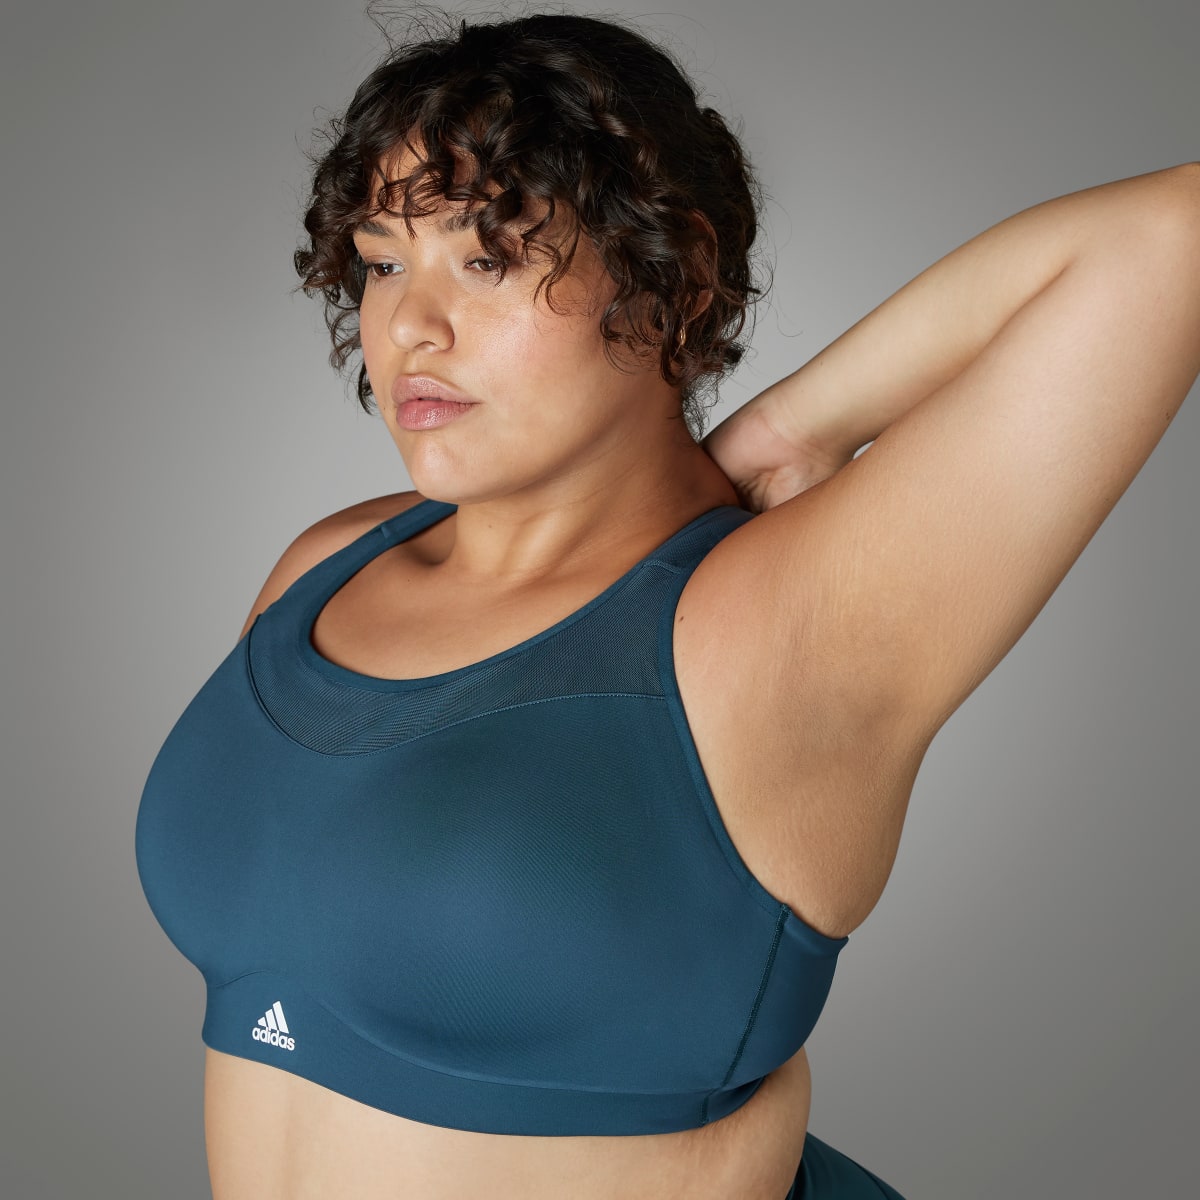 Adidas TLRD Impact Training High-Support Bra (Plus Size). 4